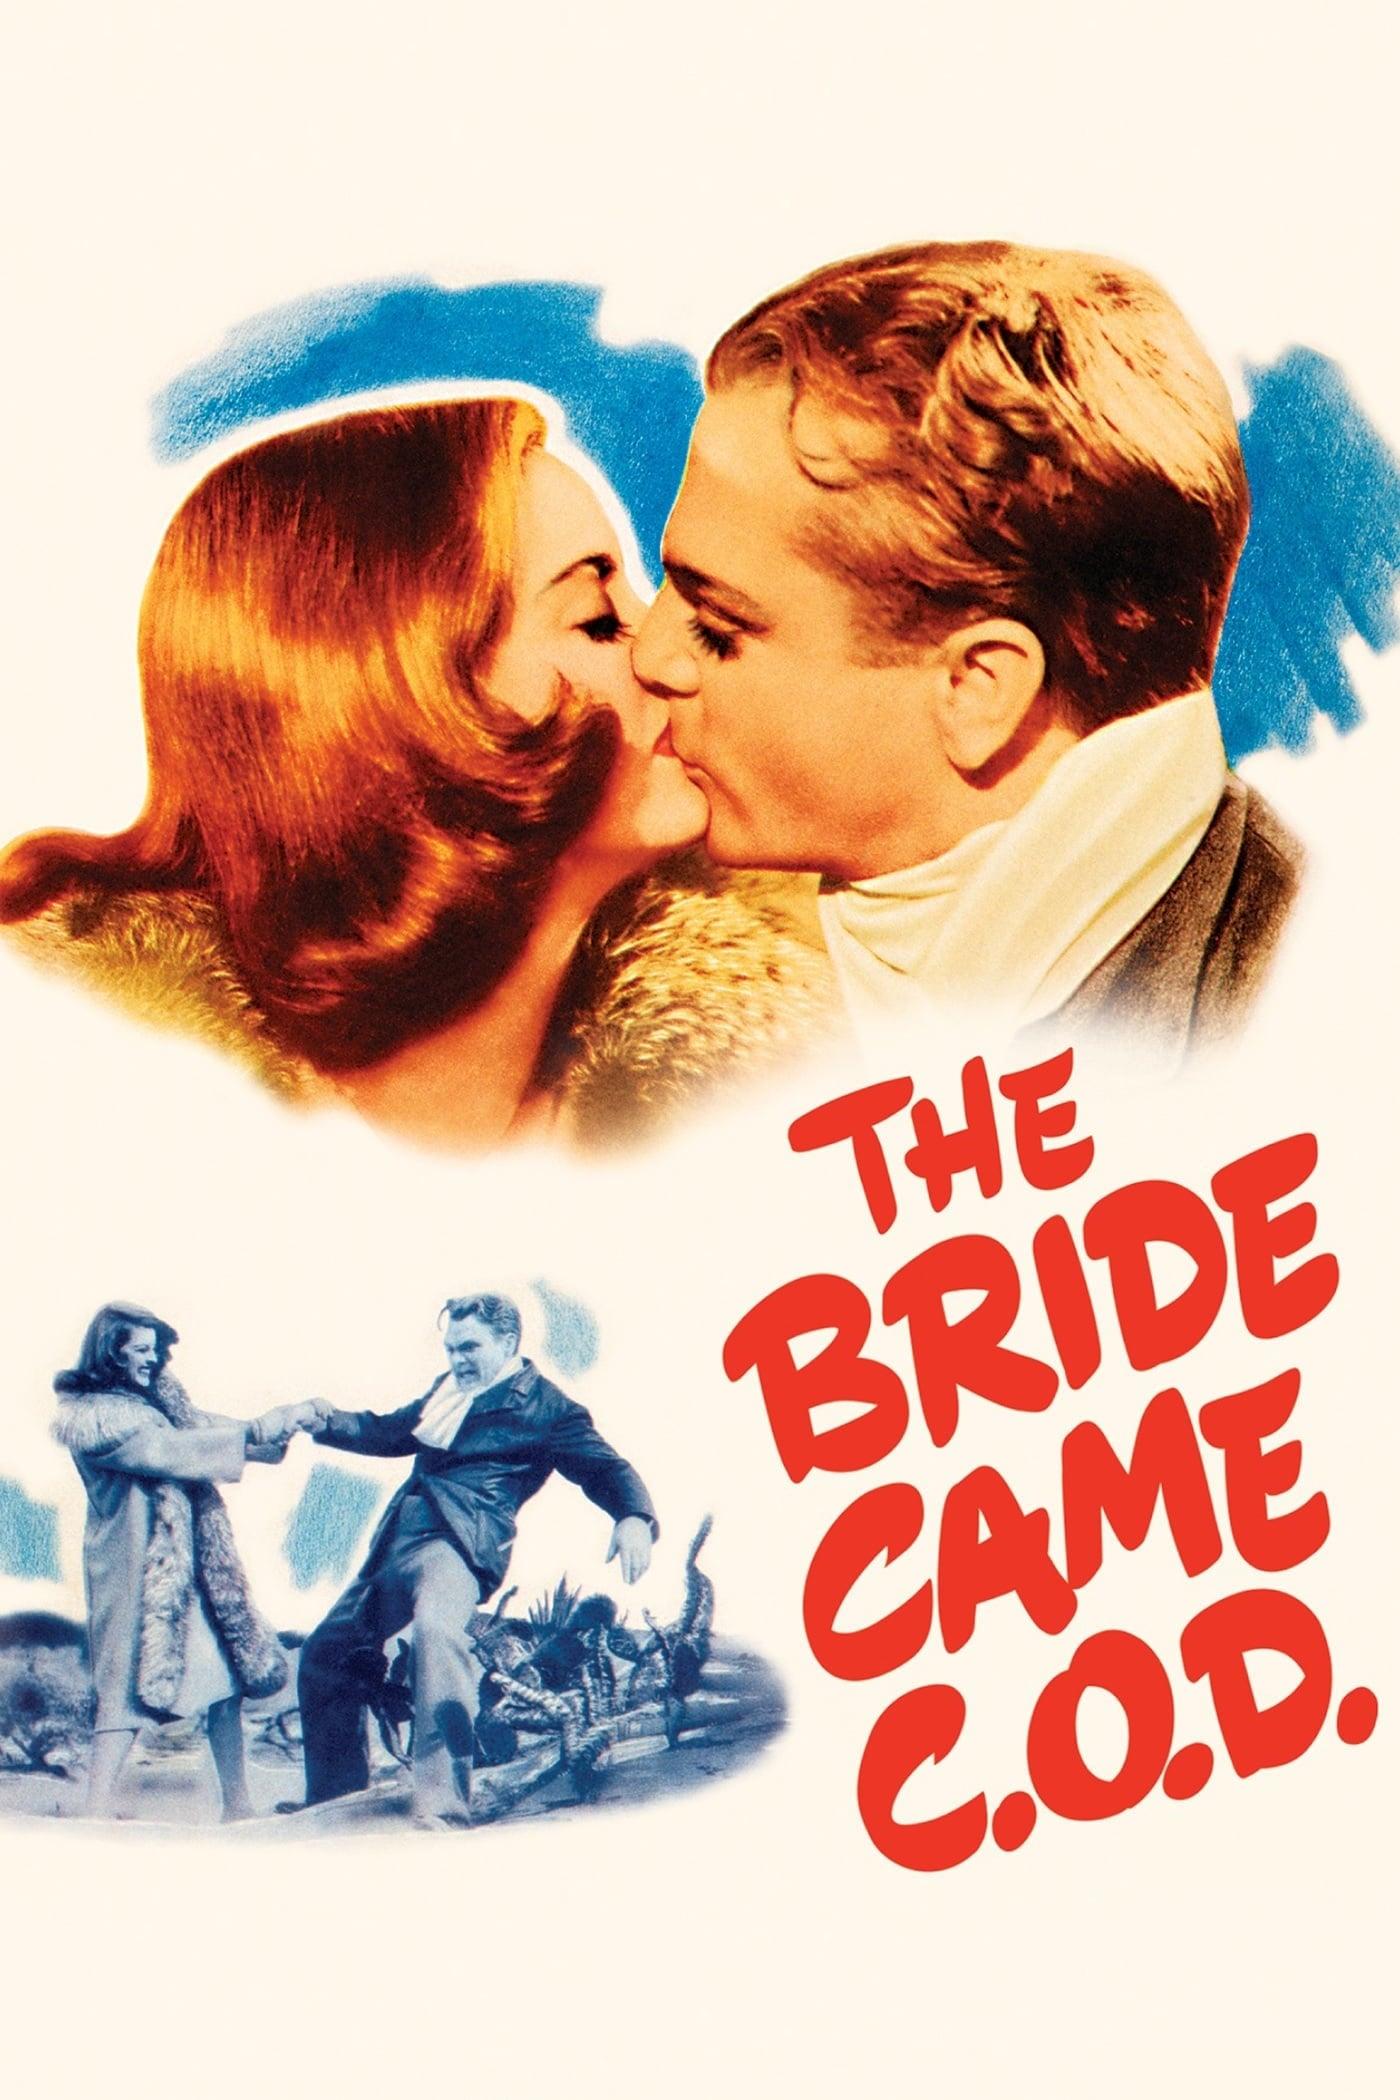 The Bride Came C.O.D. poster